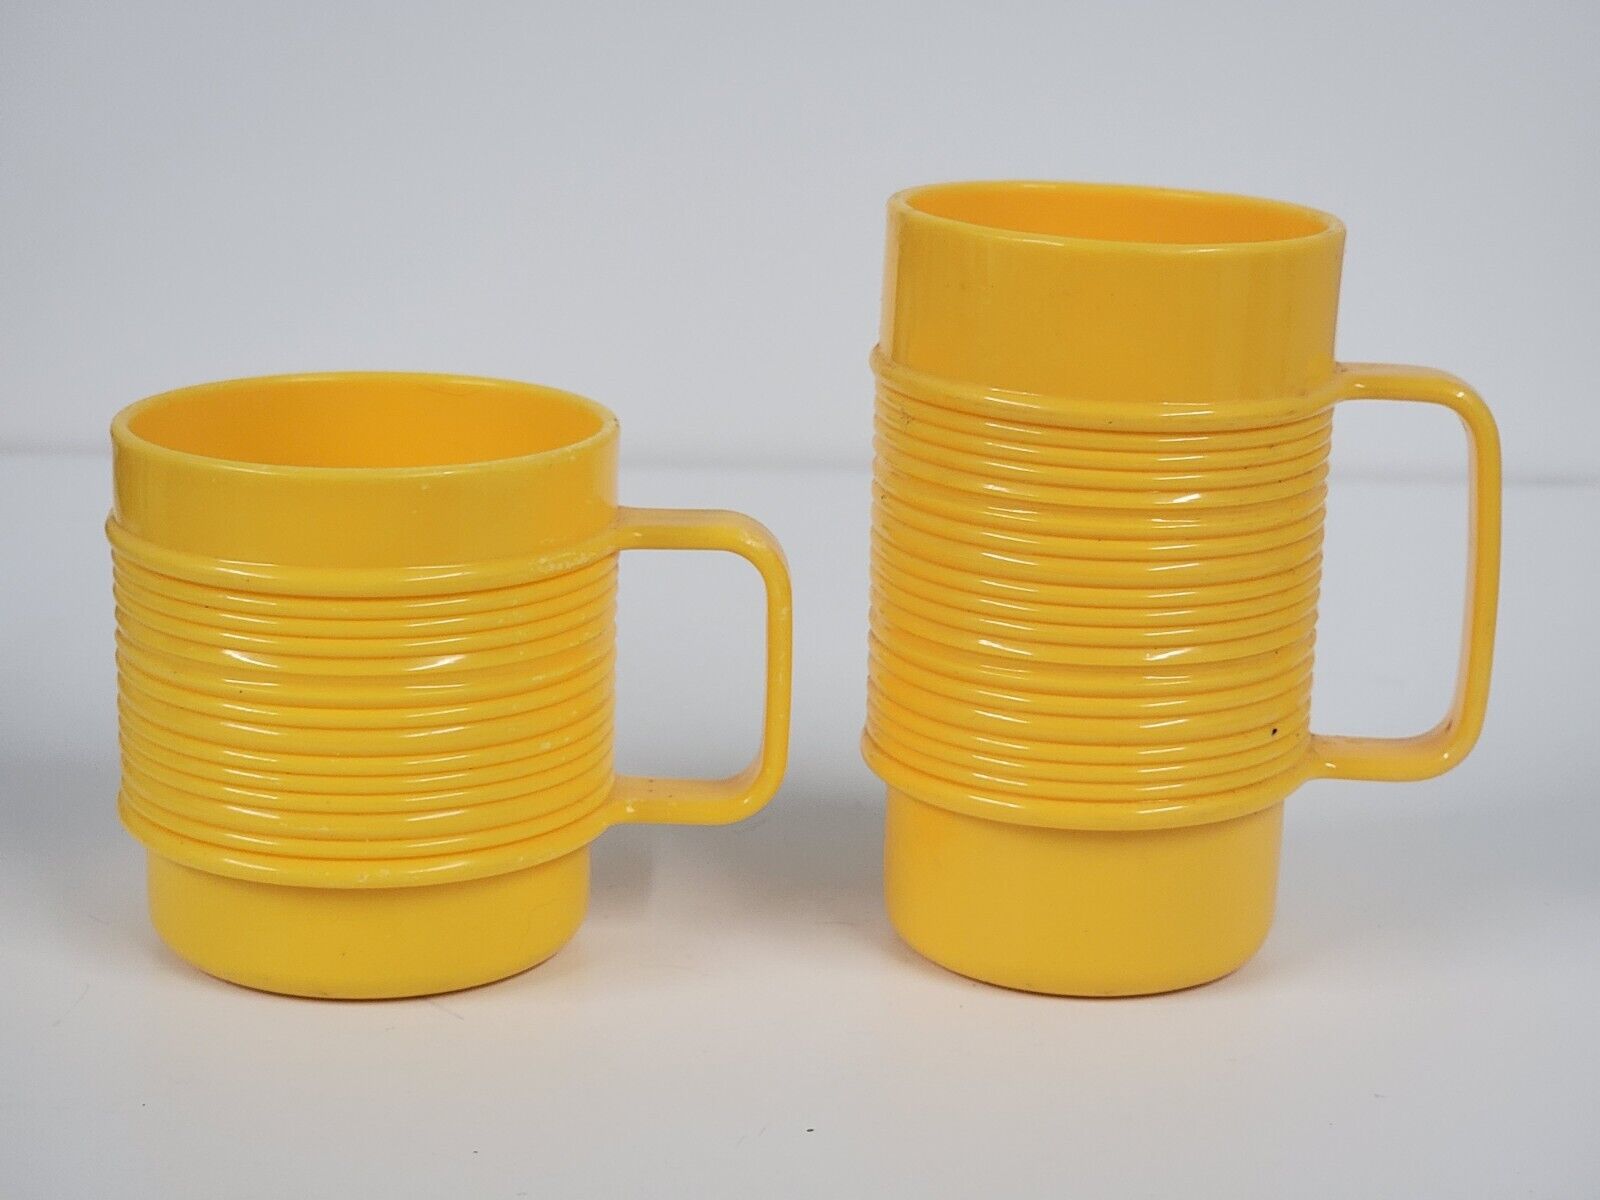 VTG Lot of 2 Rubbermaid Yellow Plastic Ribbed Stackable Cups #3826 #3819 Drink